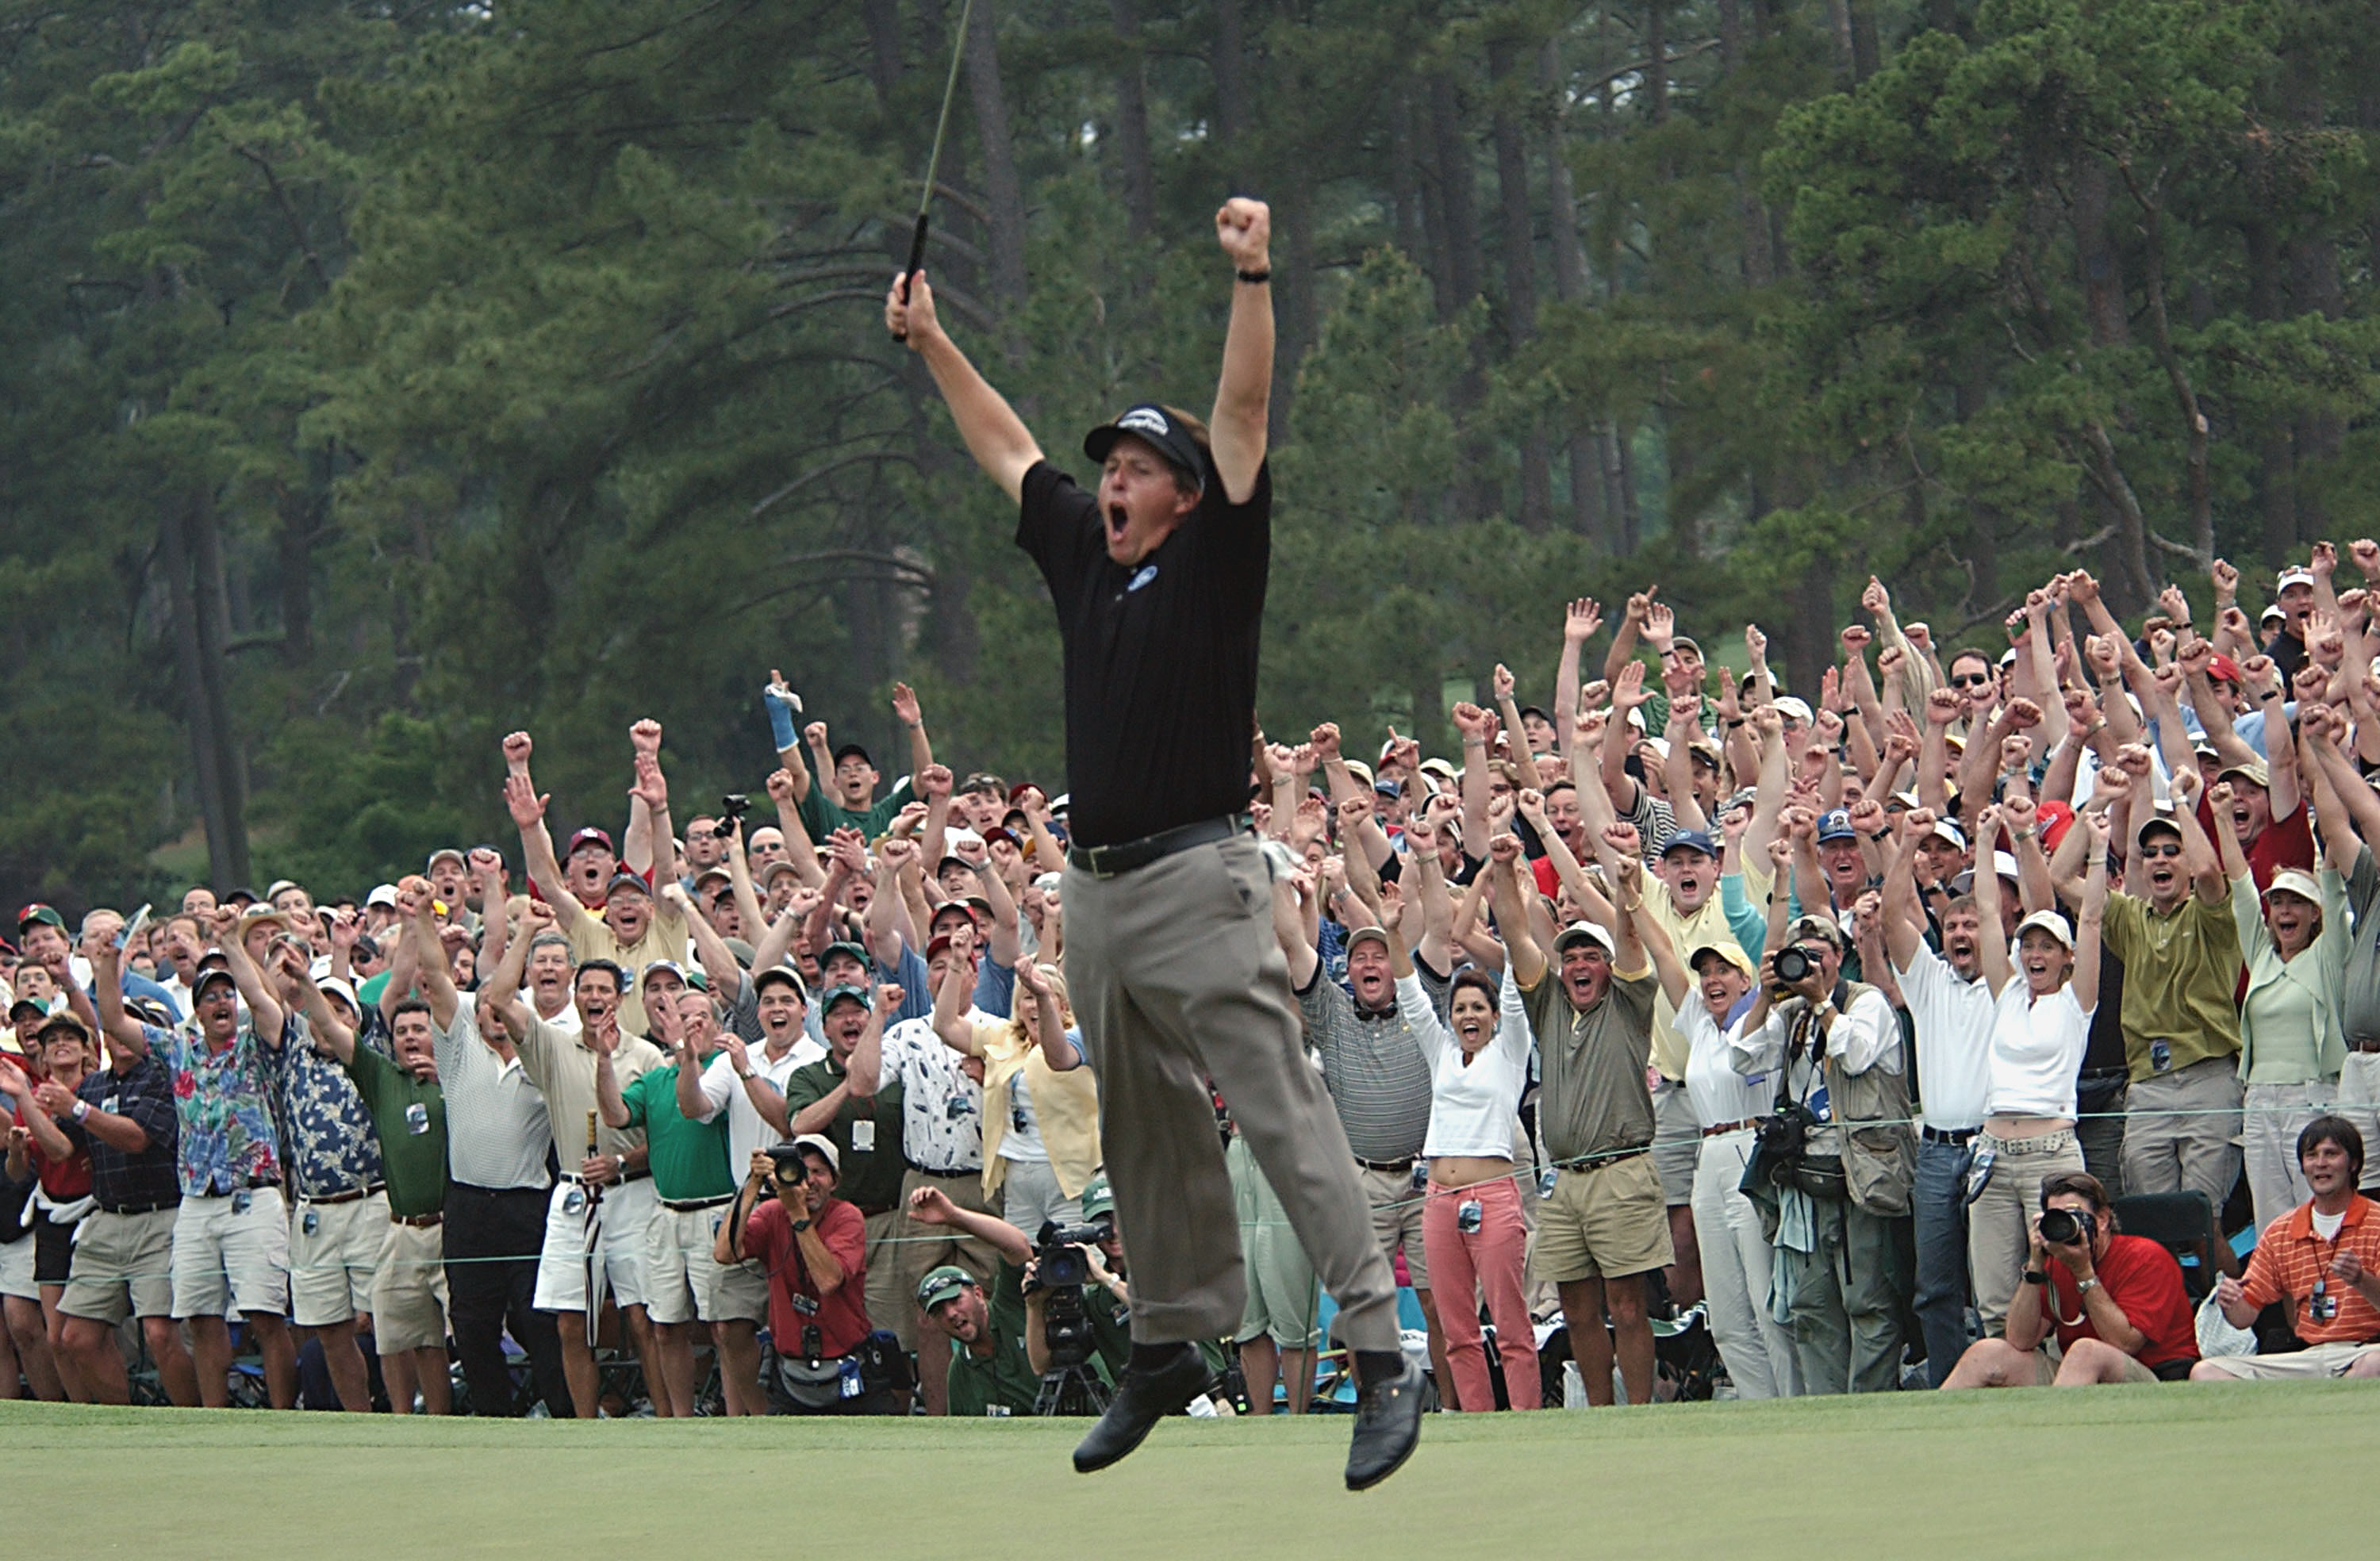 Phil Mickelson celebrates after winning the Masters golf tournament at the Augusta National Golf Club in Augusta, Ga., in this April 11, 2004 file photo. (AP Photo/Dave Martin)